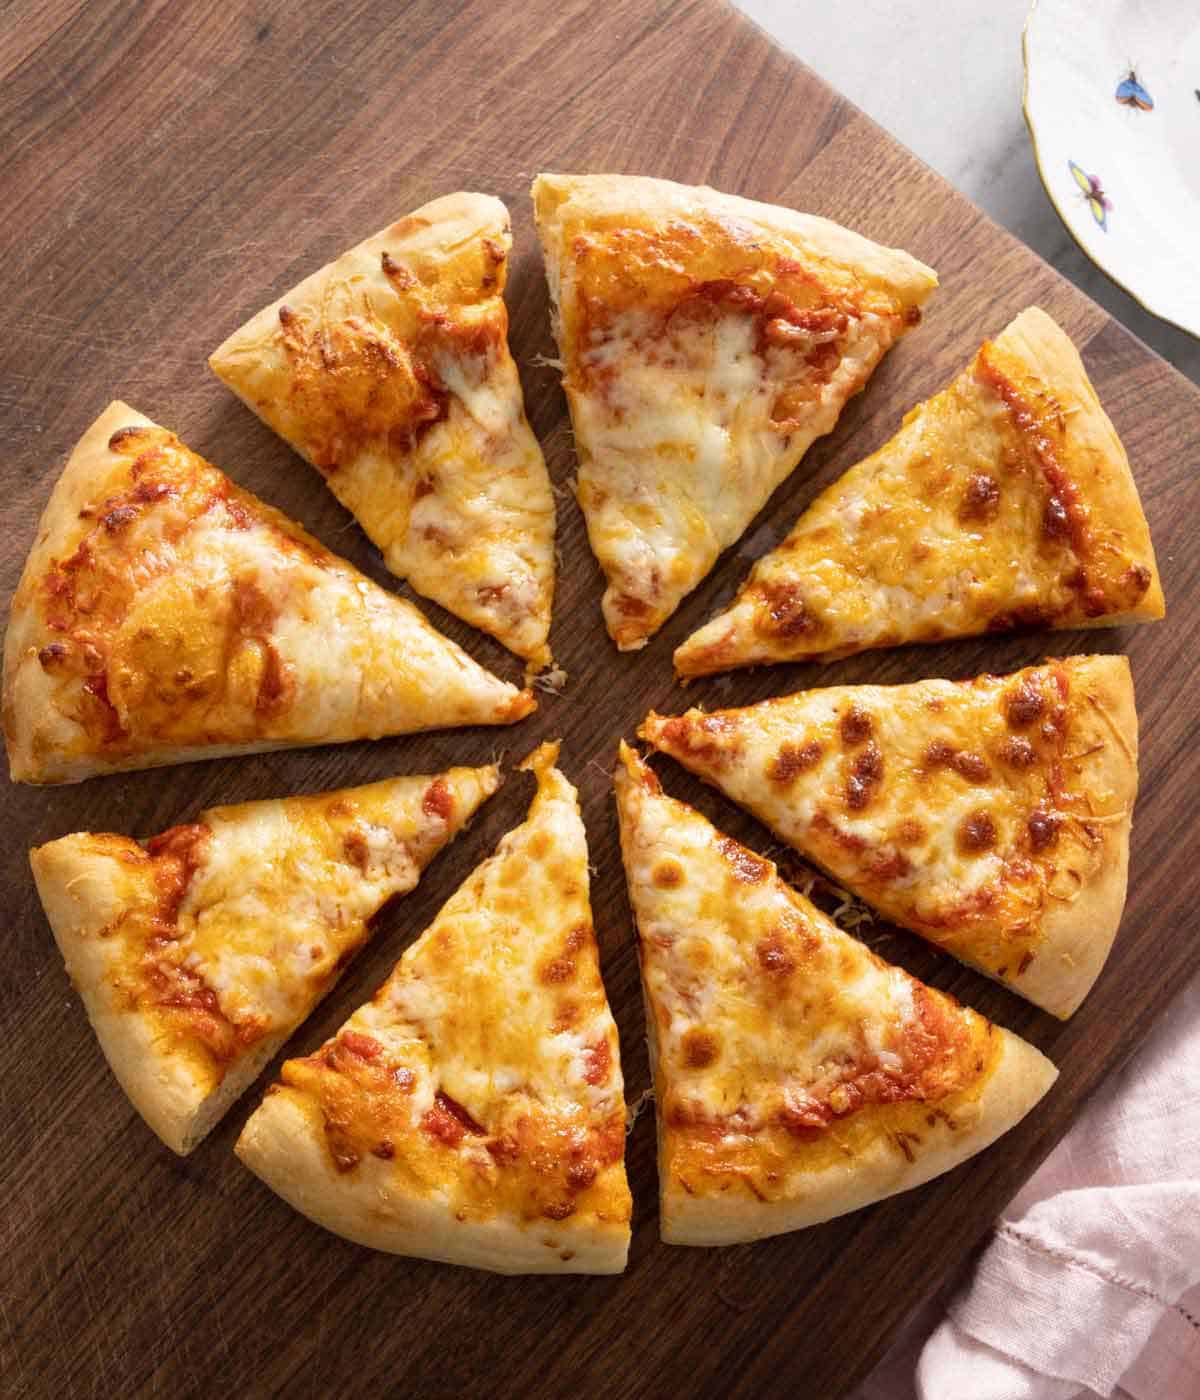 A cheese pizza cut into eight slices.